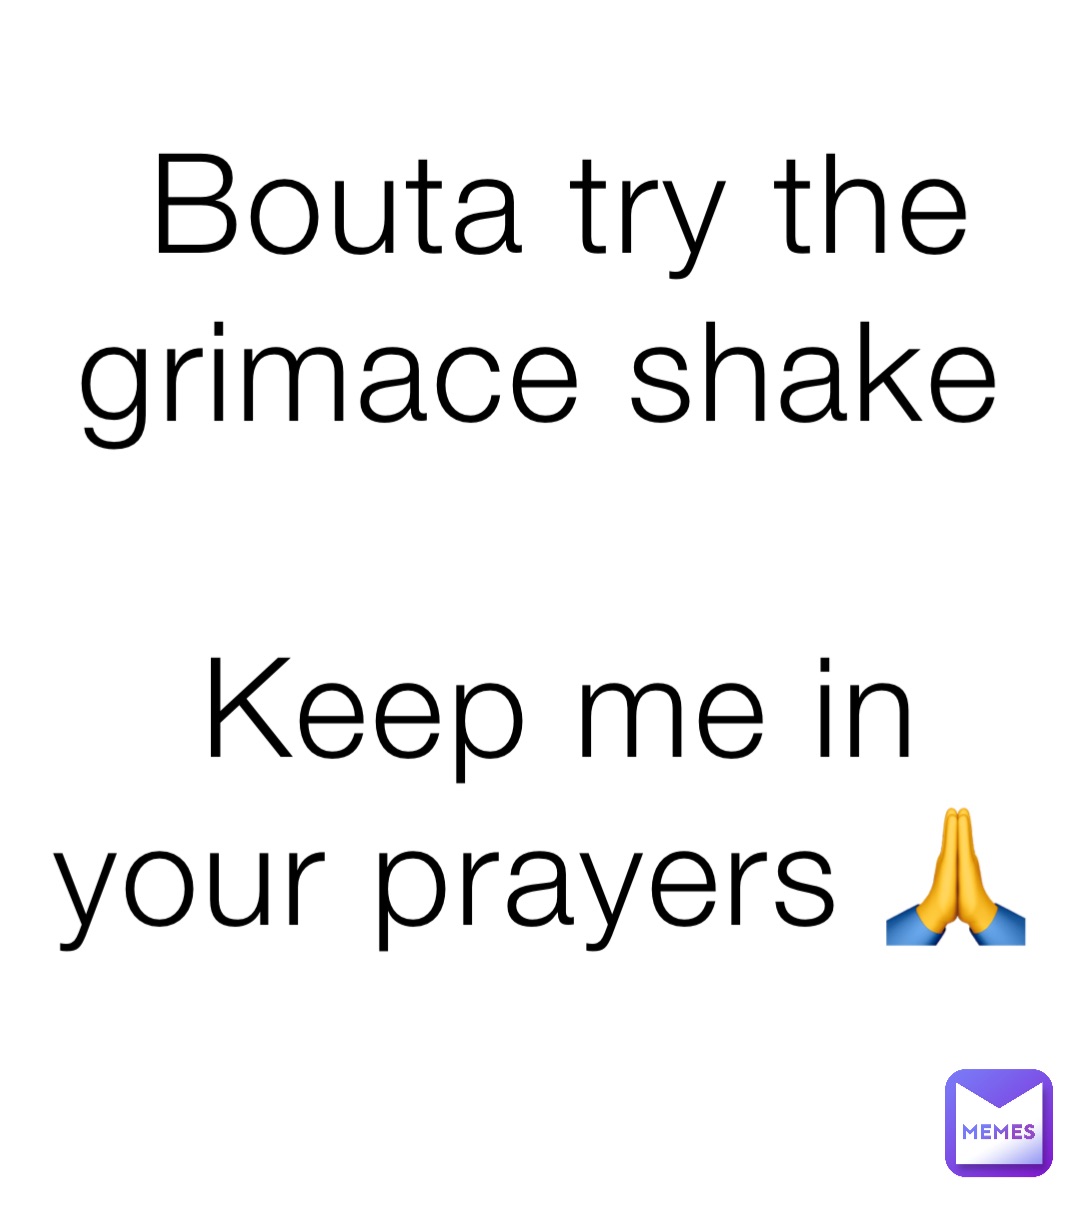 Bouta try the grimace shake

Keep me in your prayers 🙏